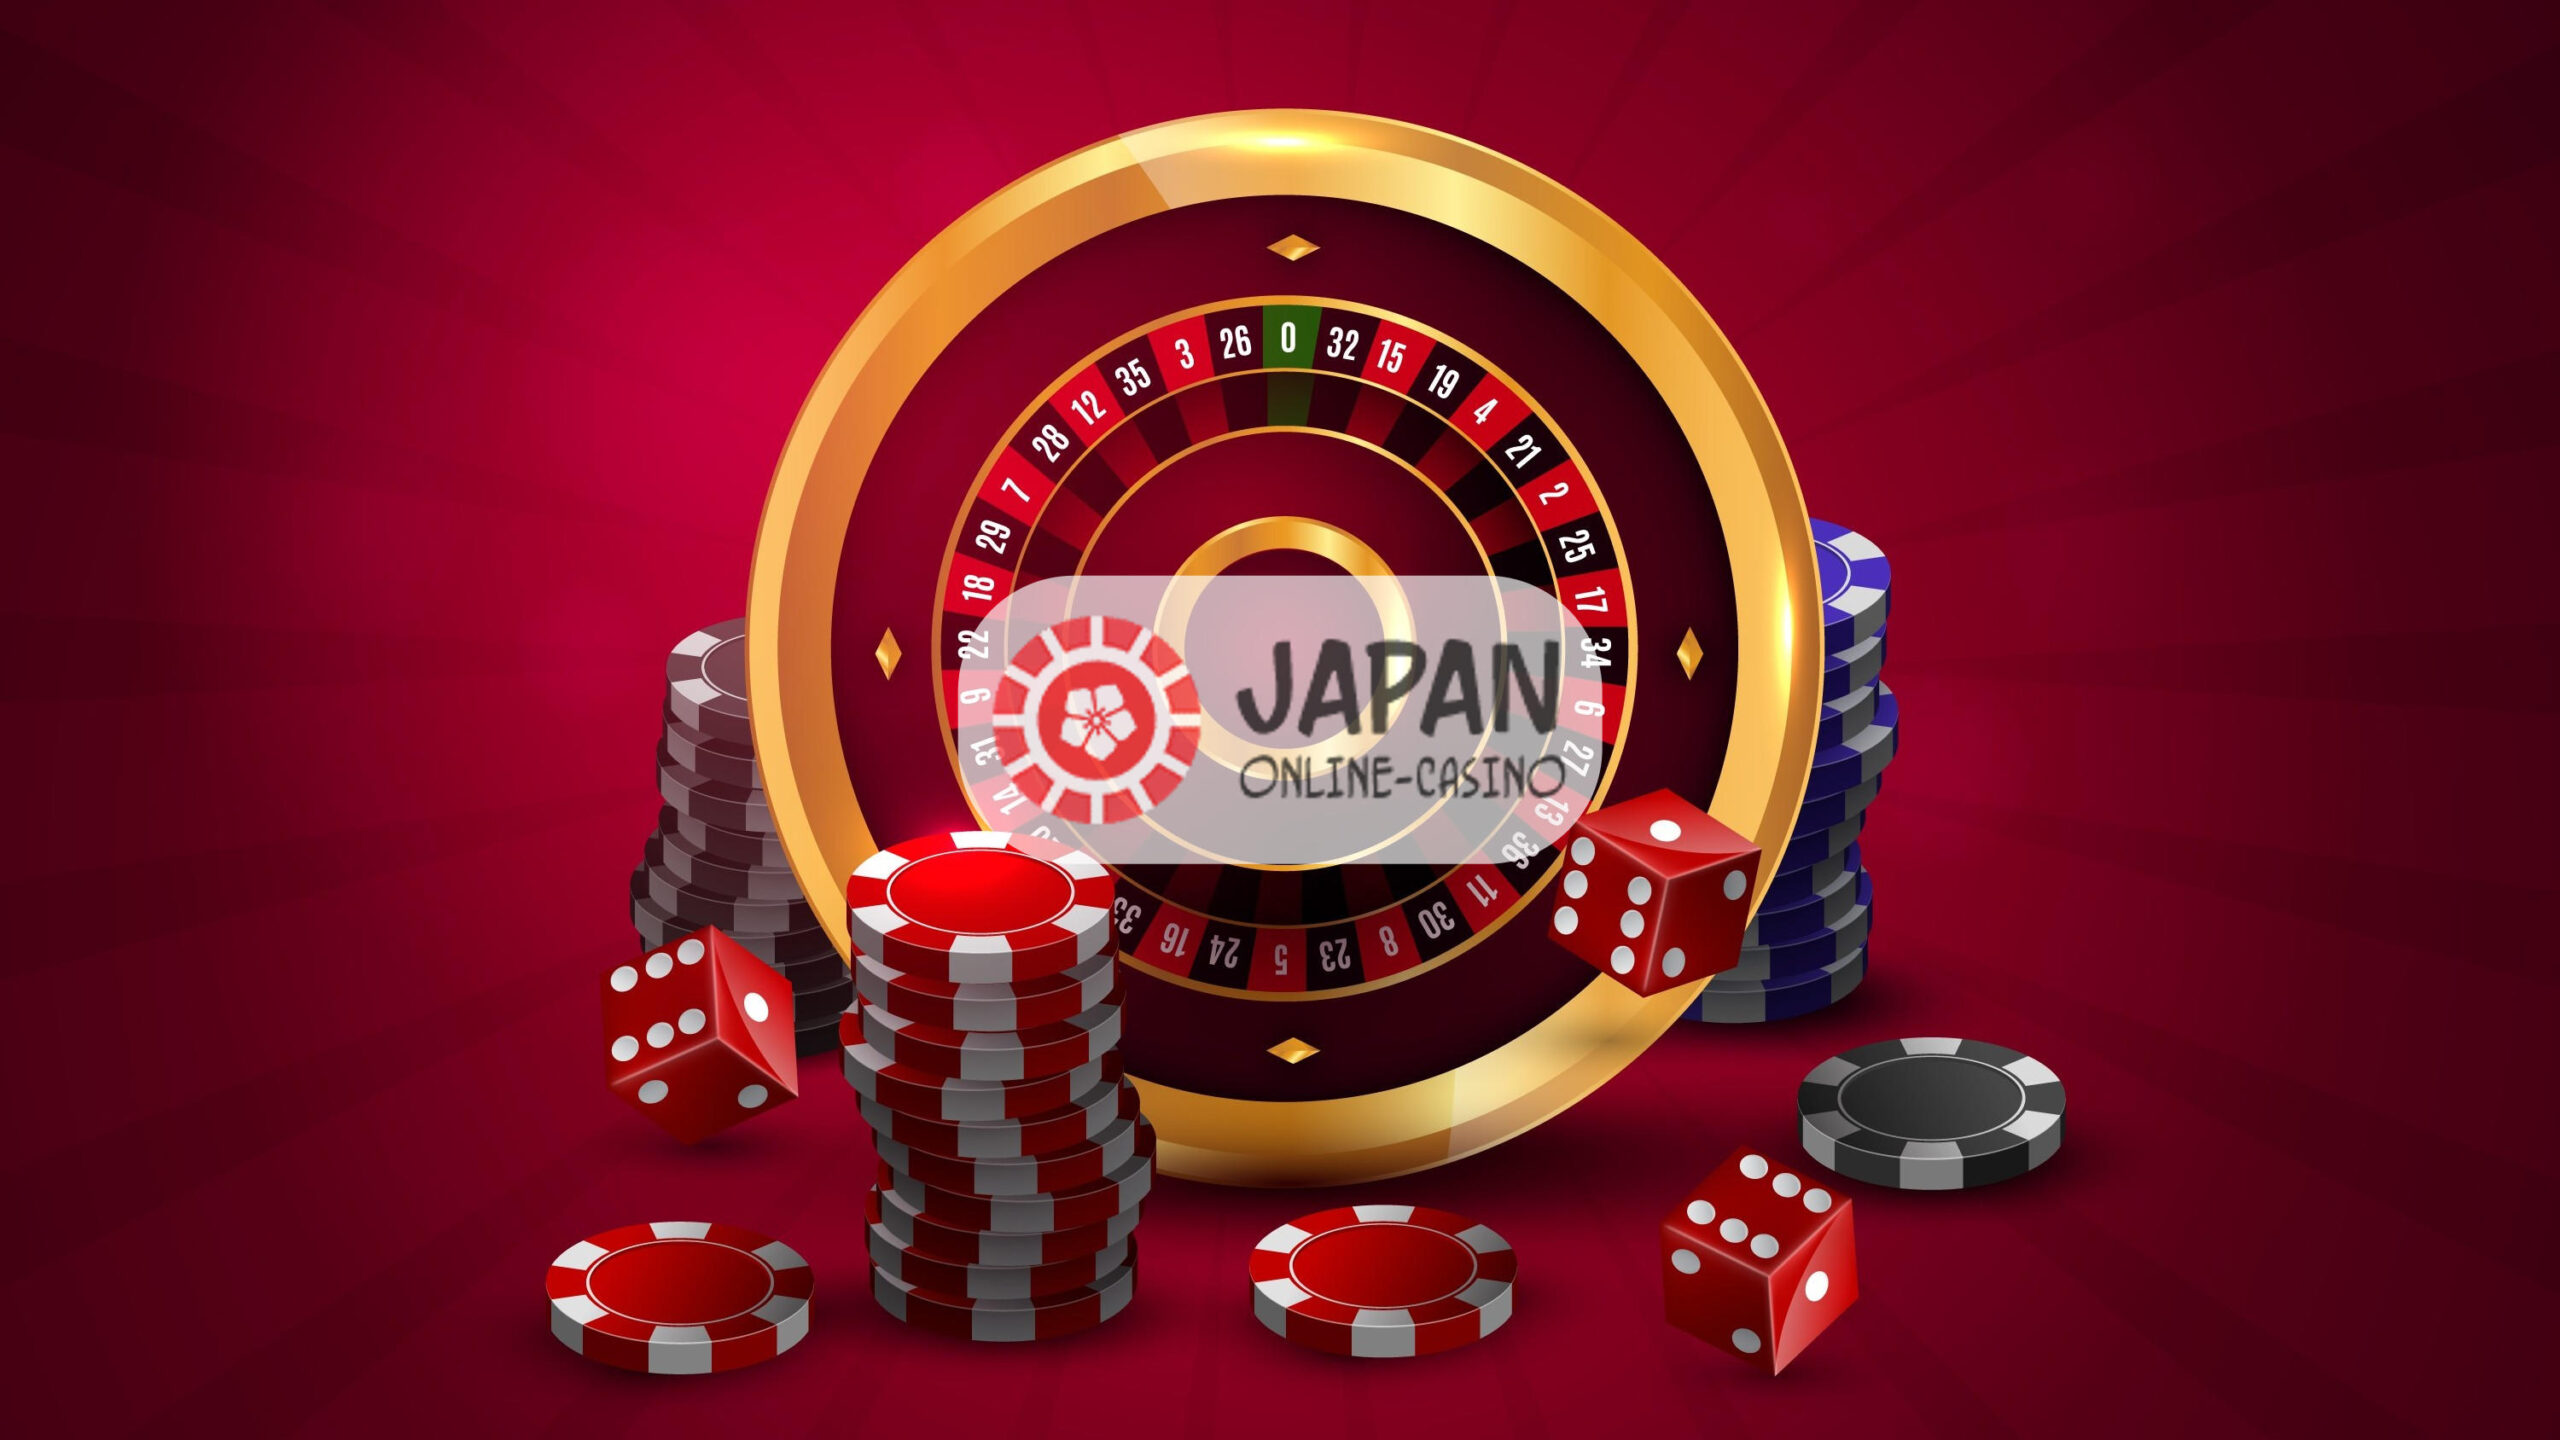 History of roulette casino